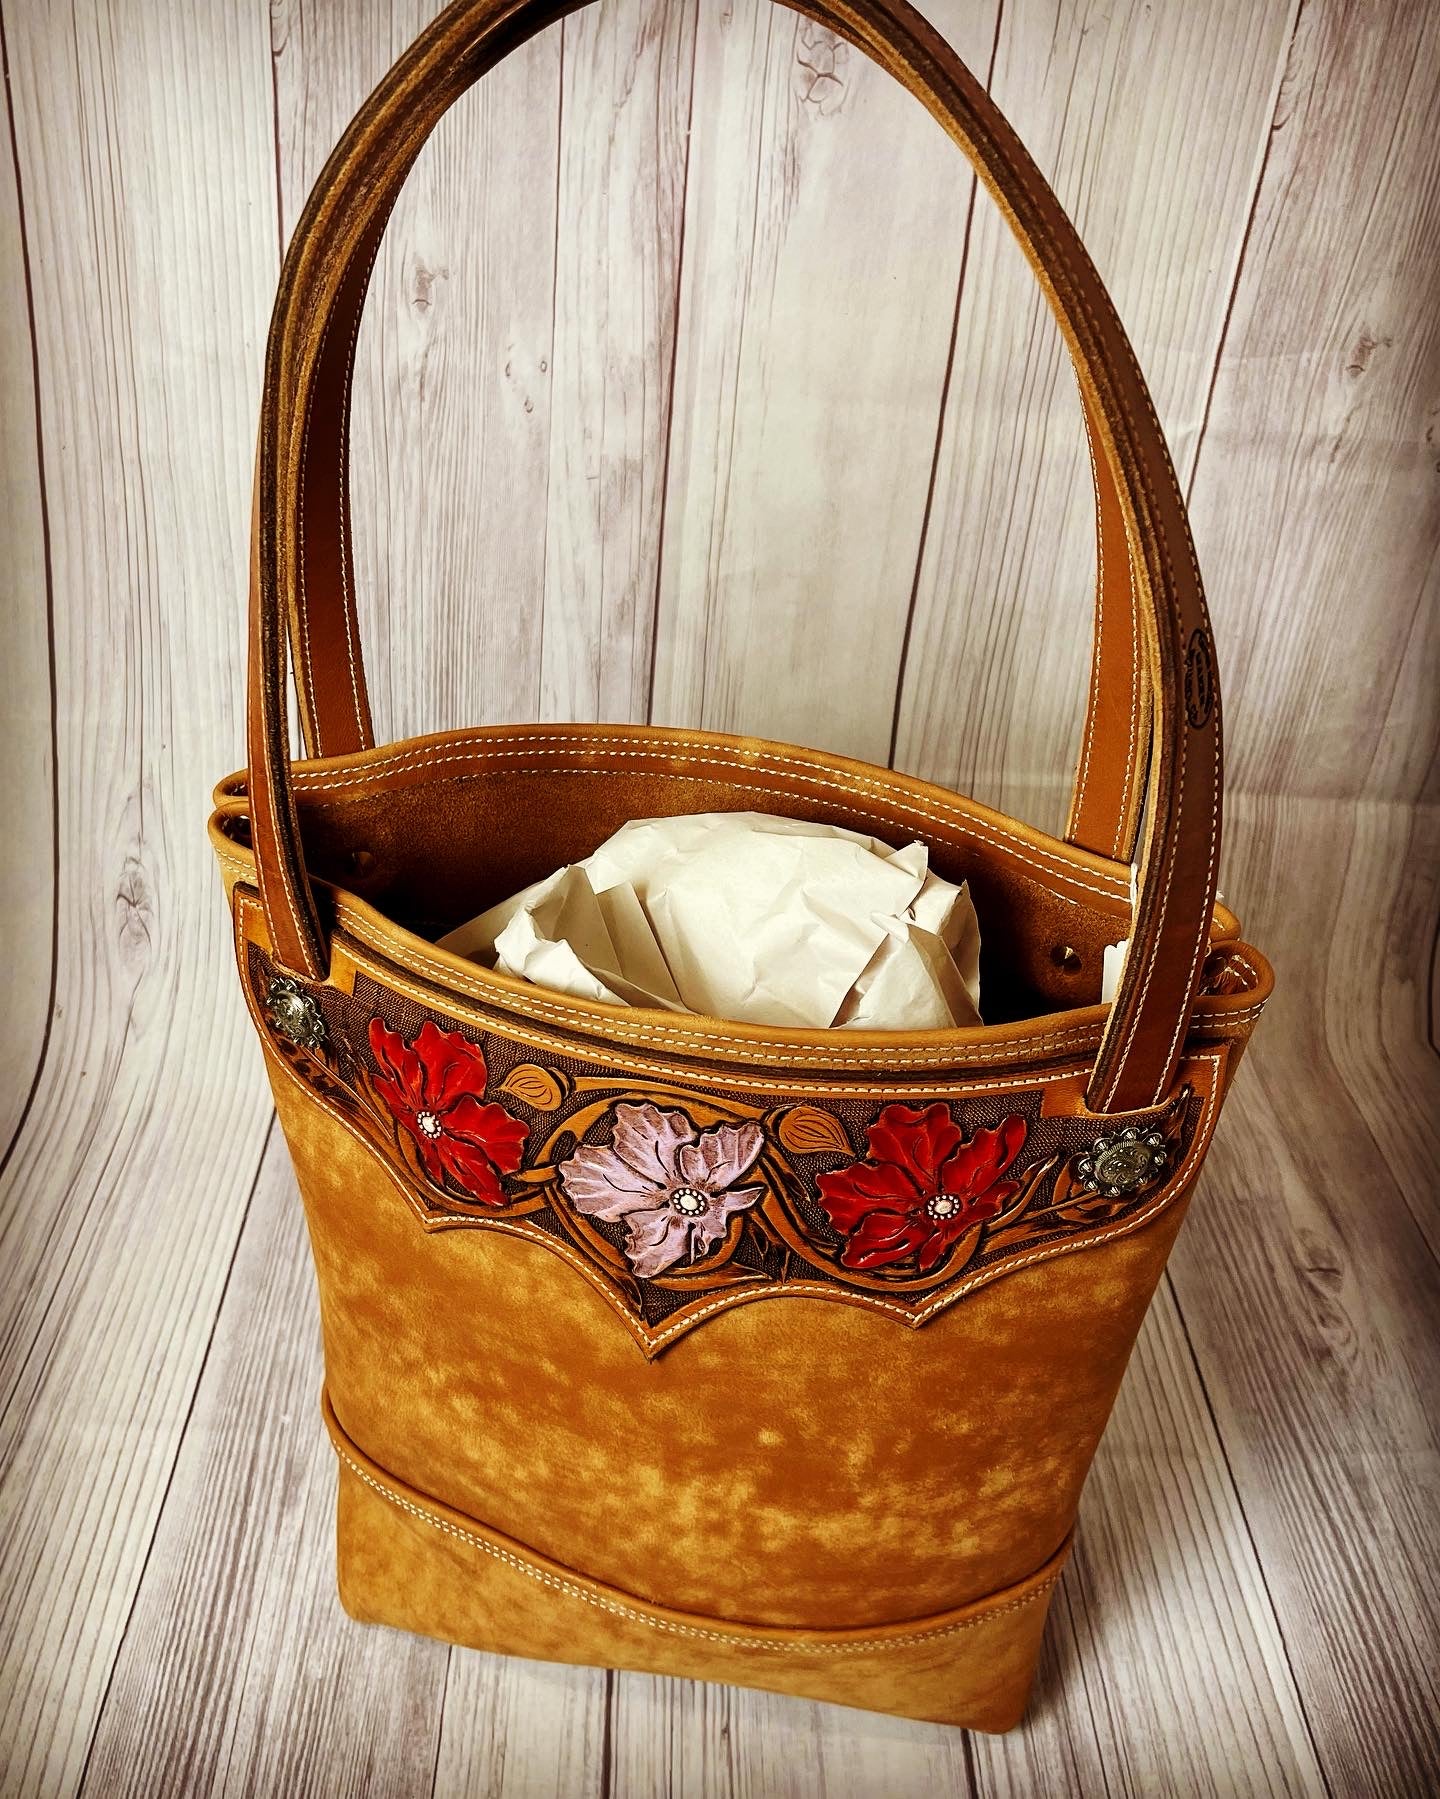 Hand Painted, Flower Carved Panel Tote Bag